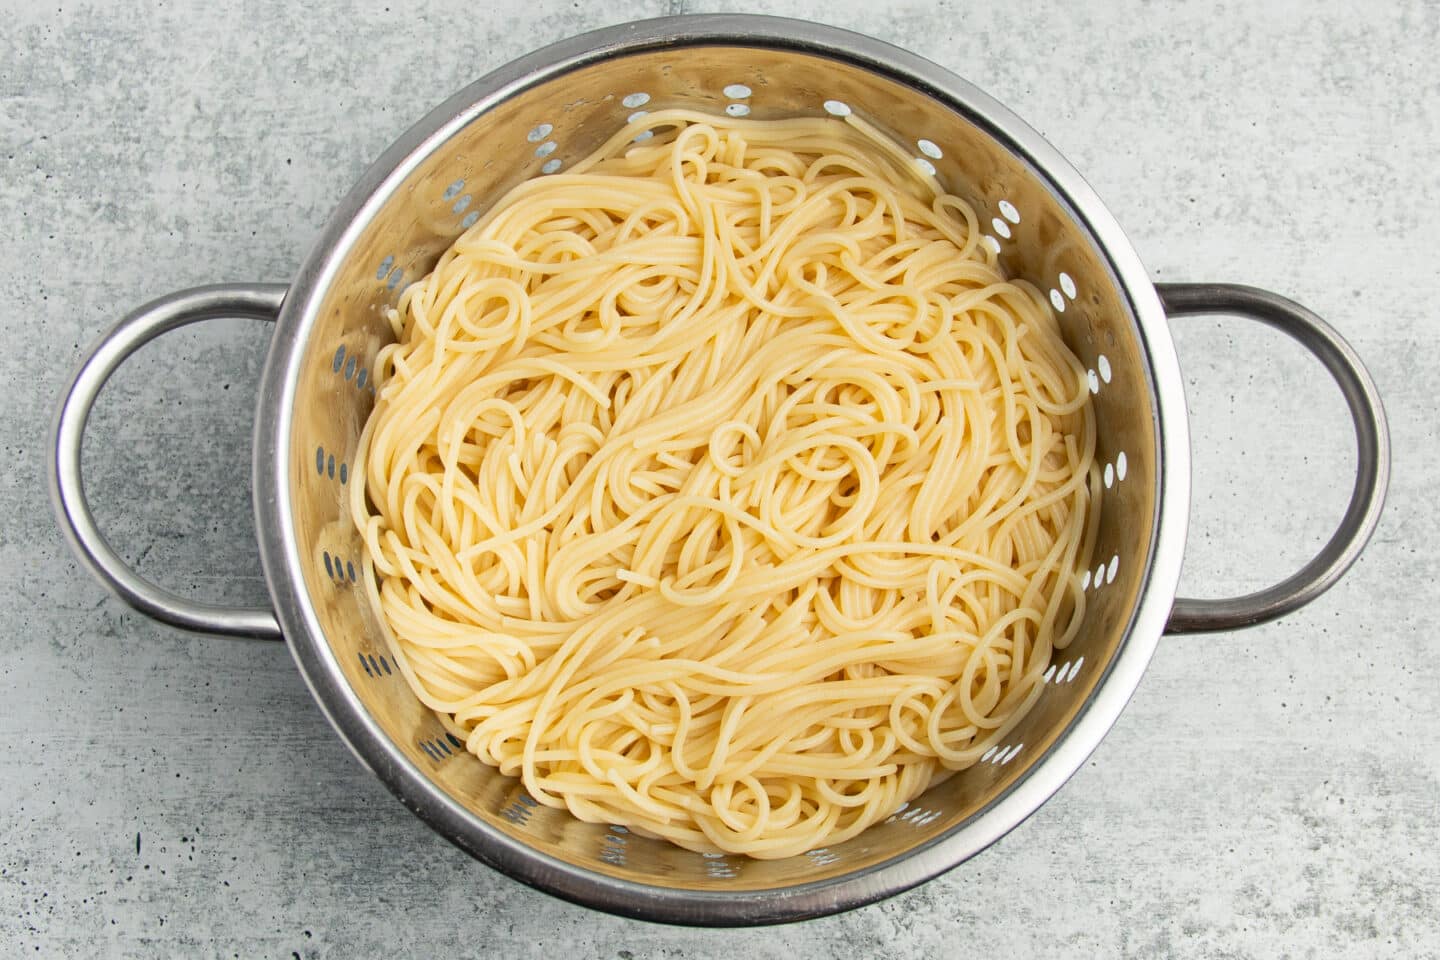 This is a picture of cooked spaghetti in a colander.